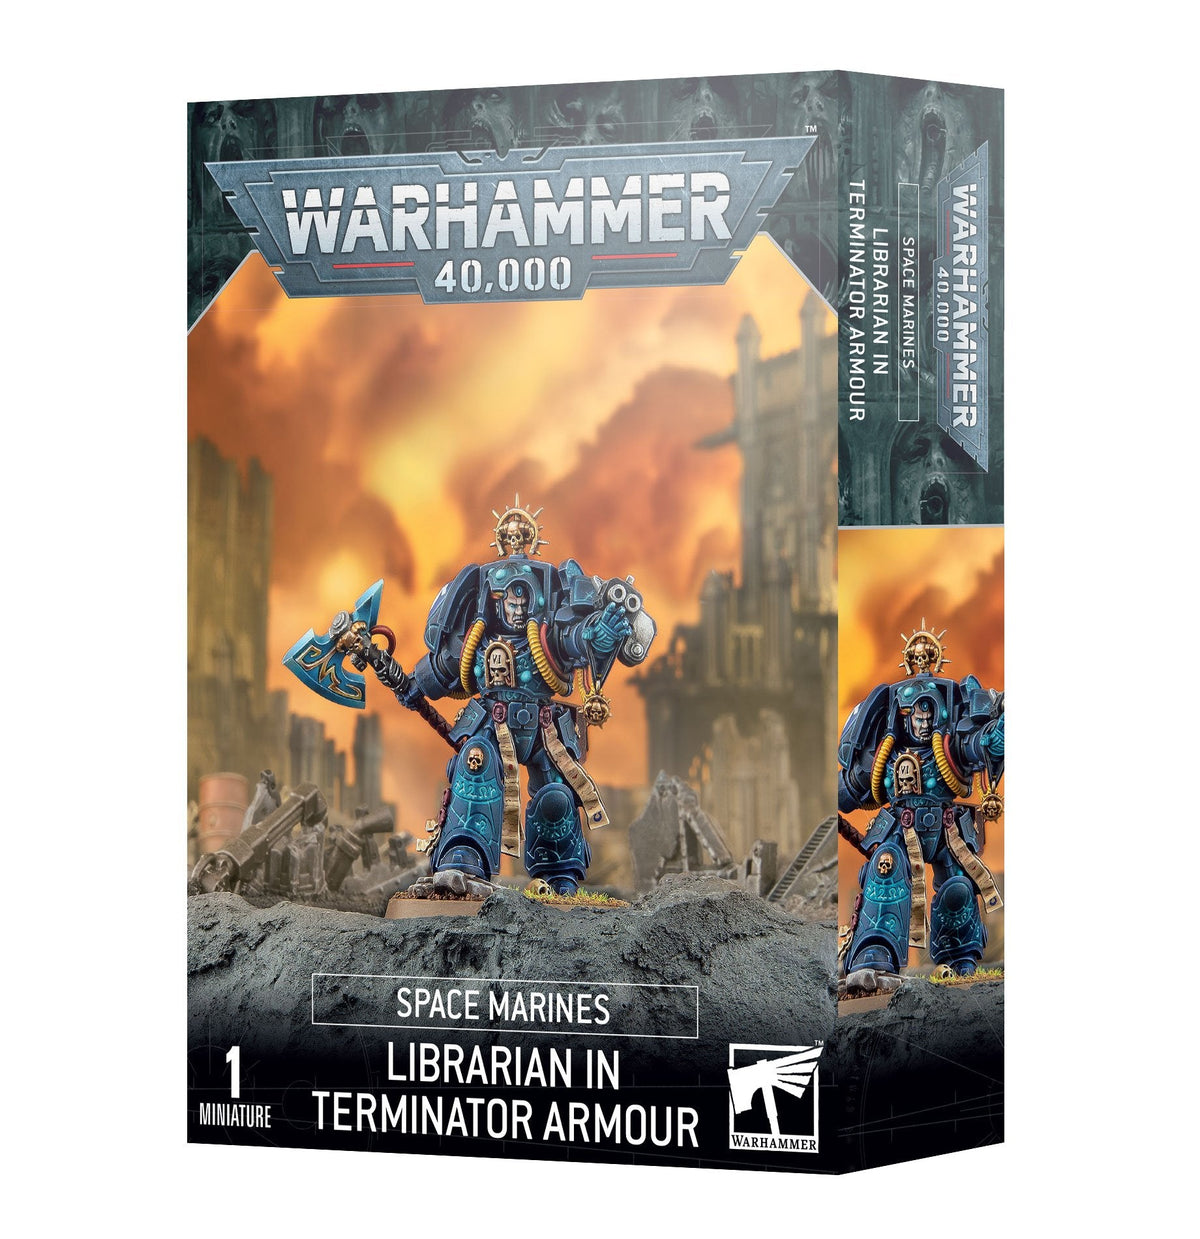 Space Marines - Librarian in Terminator Armour (Warhammer 40000)